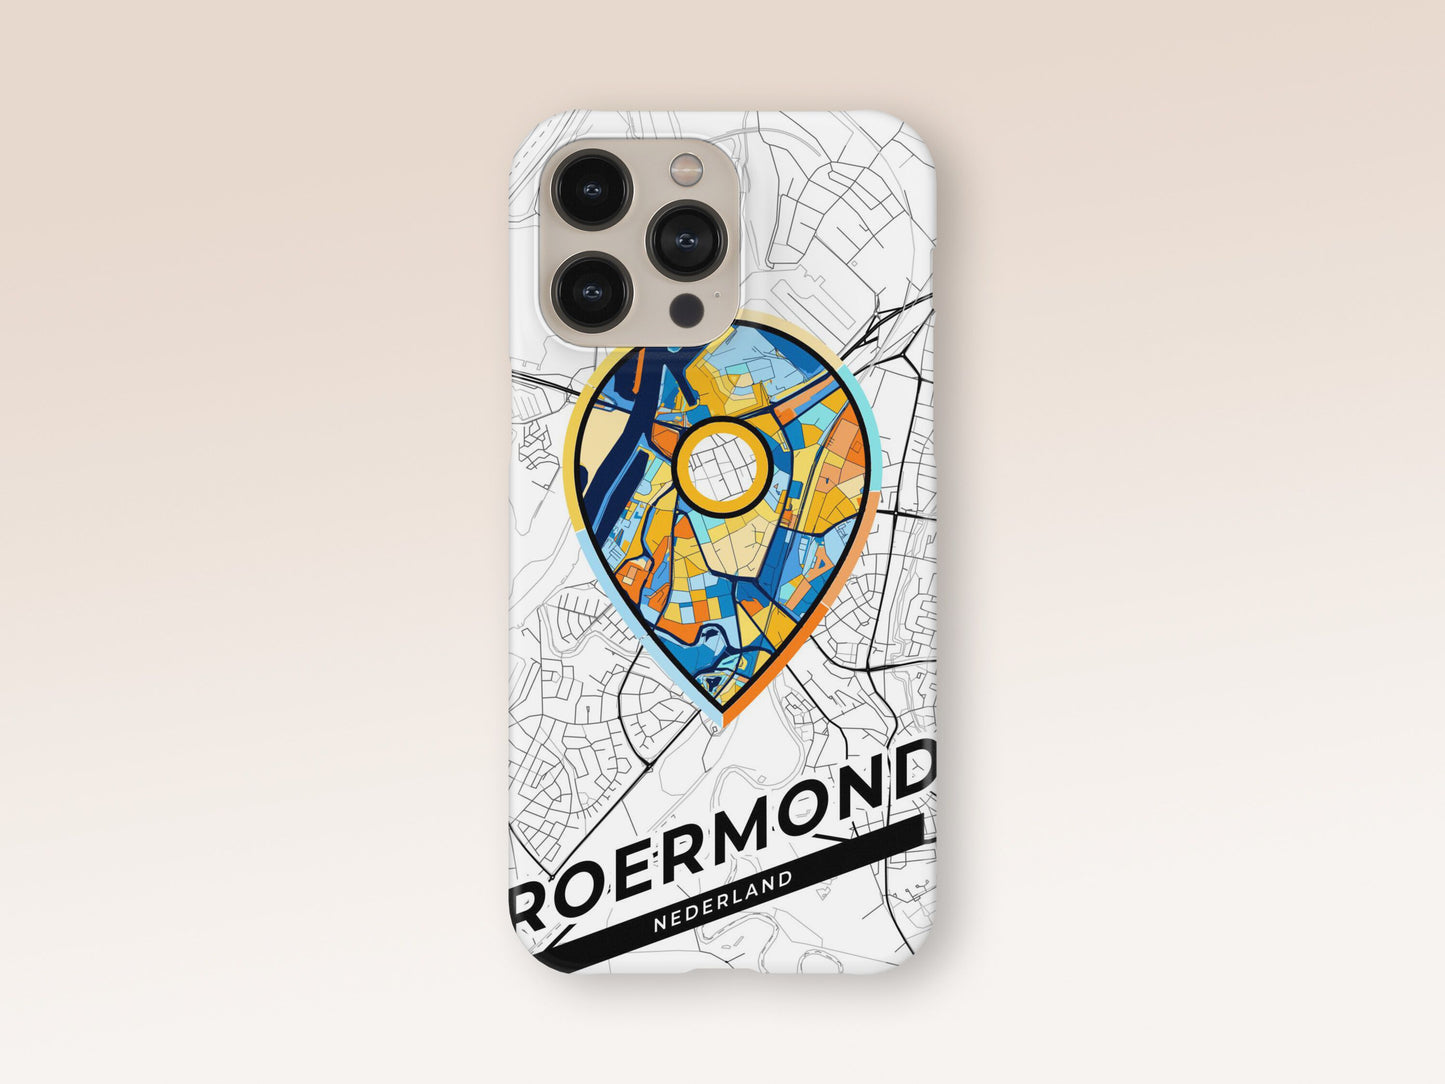 Roermond Netherlands slim phone case with colorful icon. Birthday, wedding or housewarming gift. Couple match cases. 1